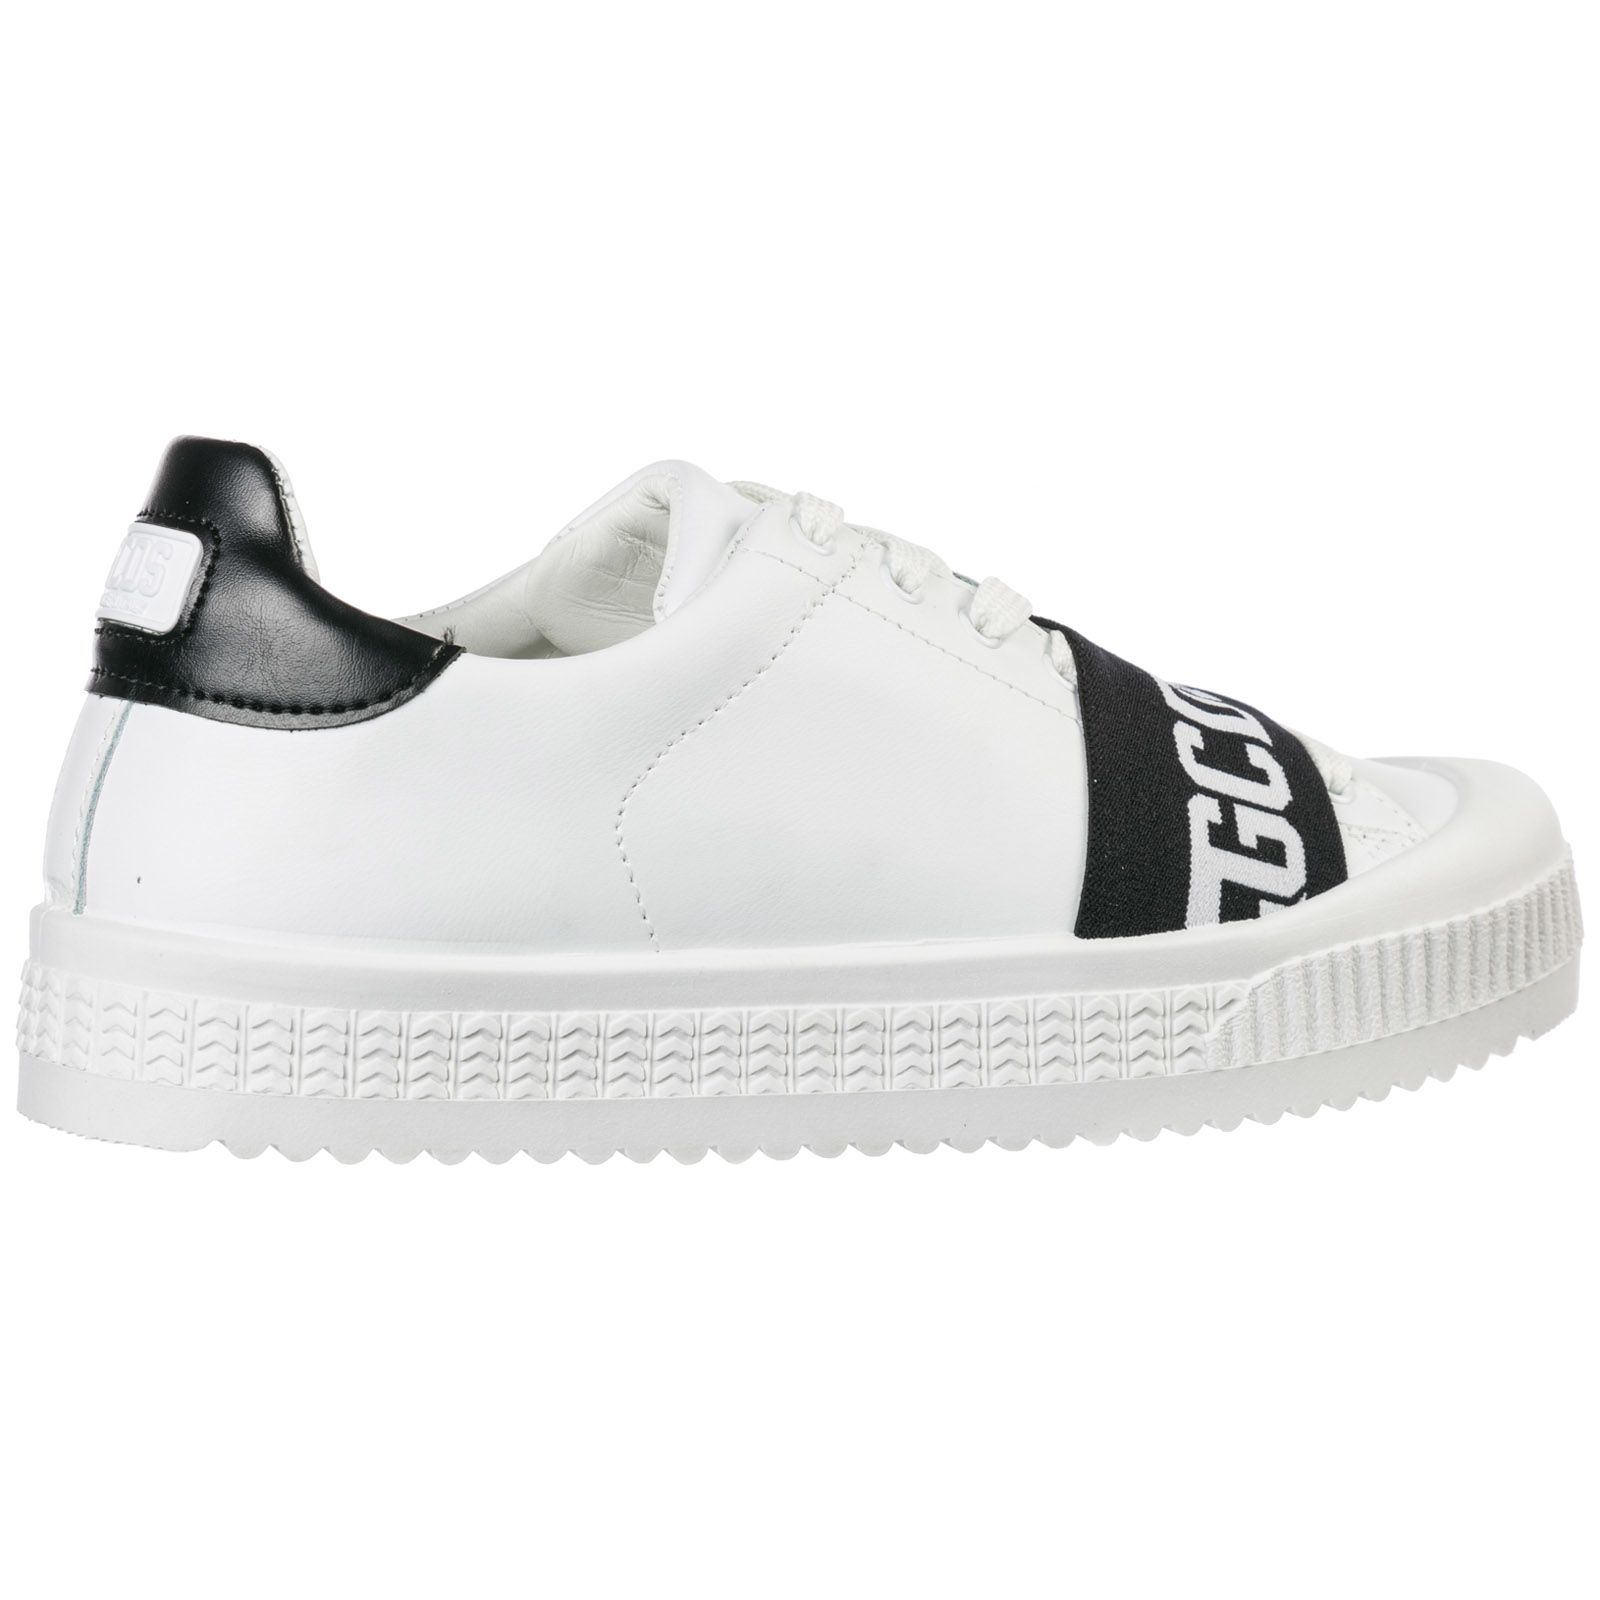 GCDS GCDS Shoes Leather Trainers Sneakers - Bianco - 10881454 | italist